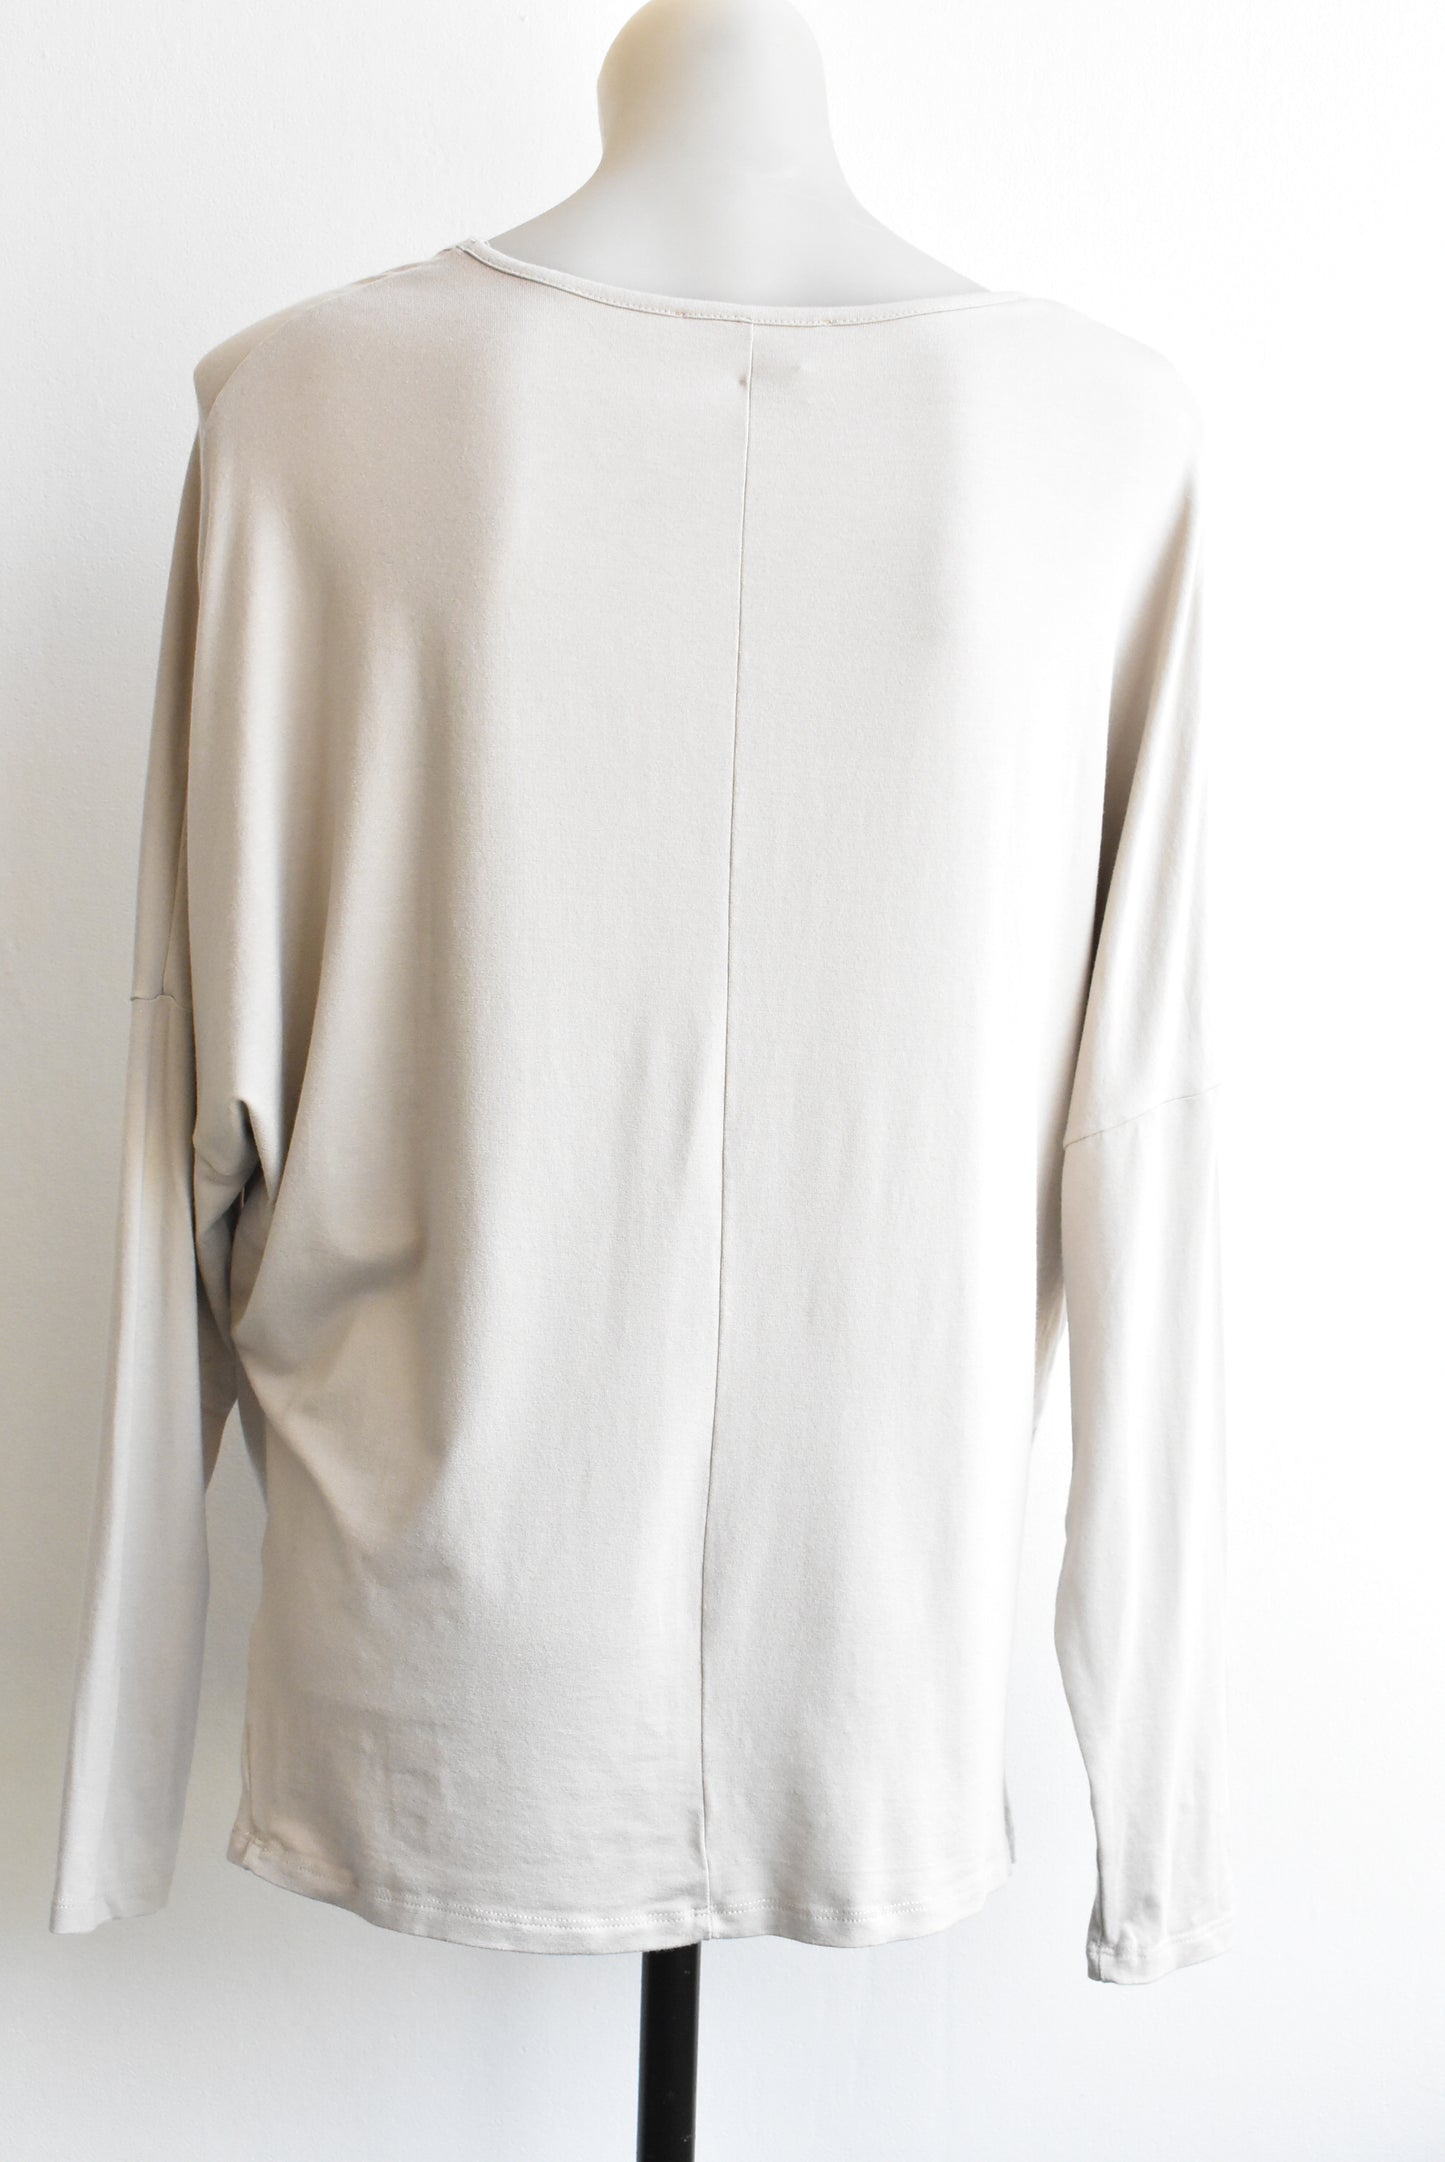 Relaxed side-tuck dolman sleeved grey top, size L